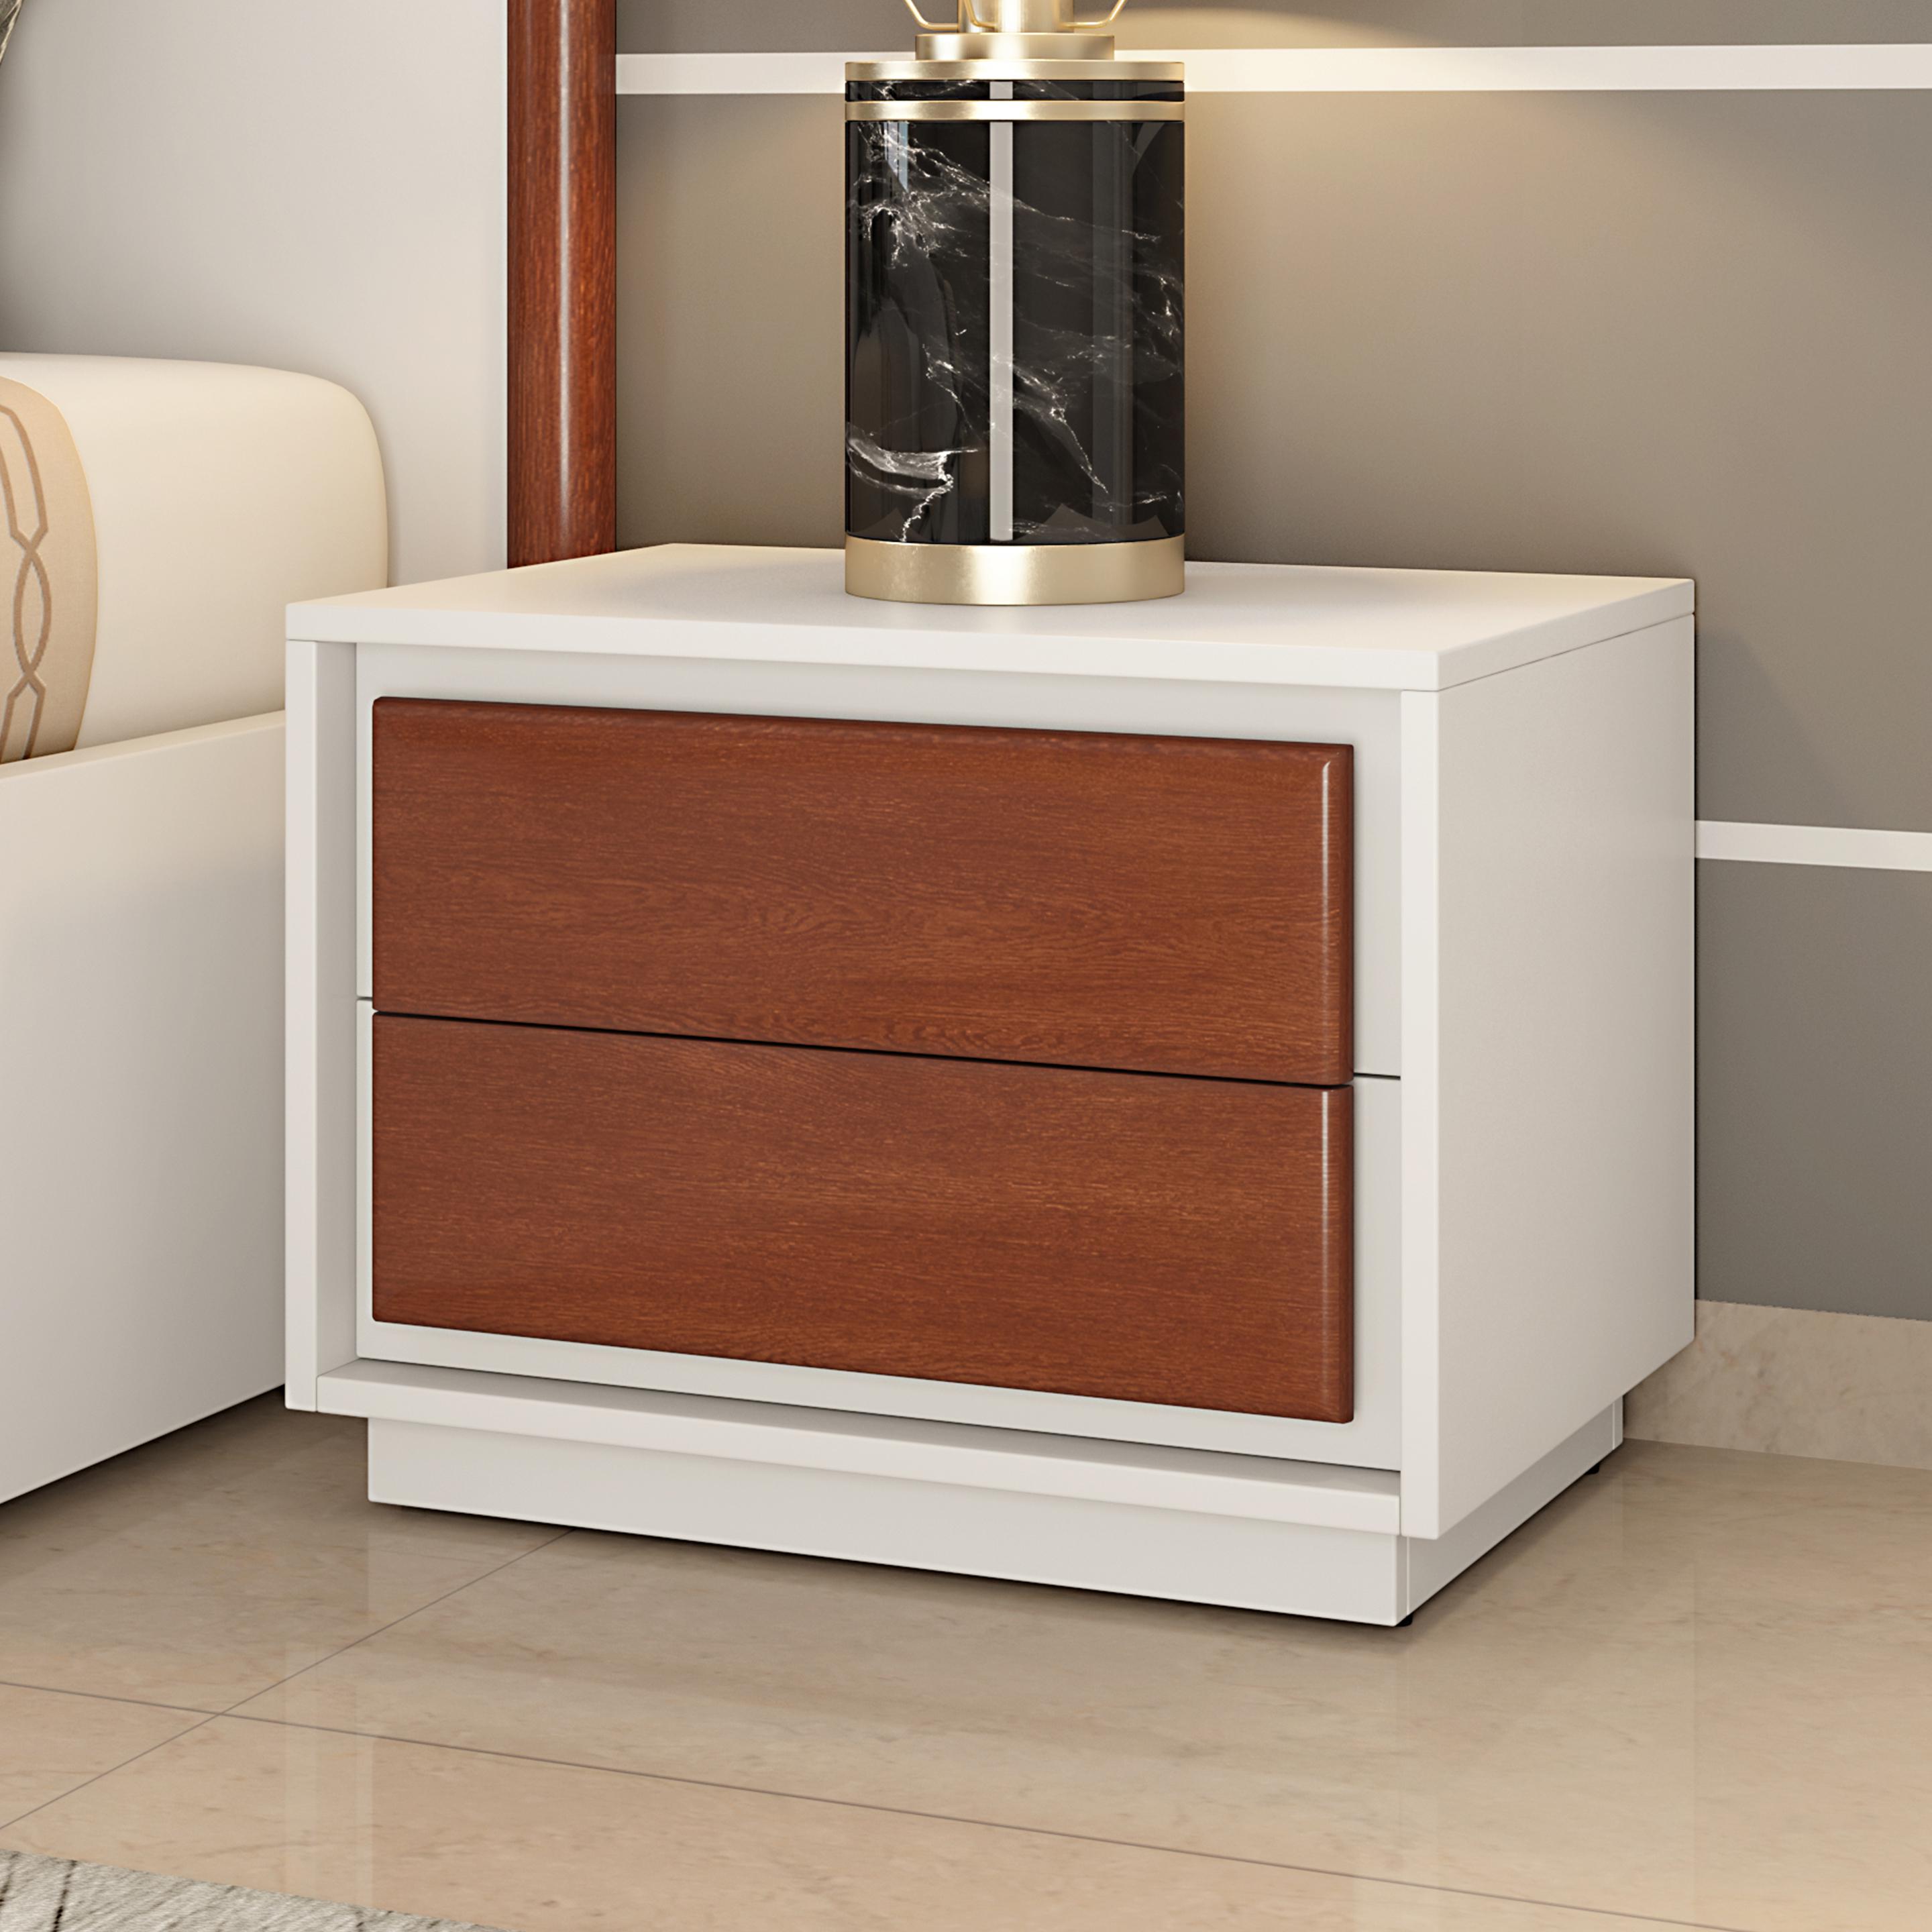 Magnolia Bed Side Table in Two Tone Finish